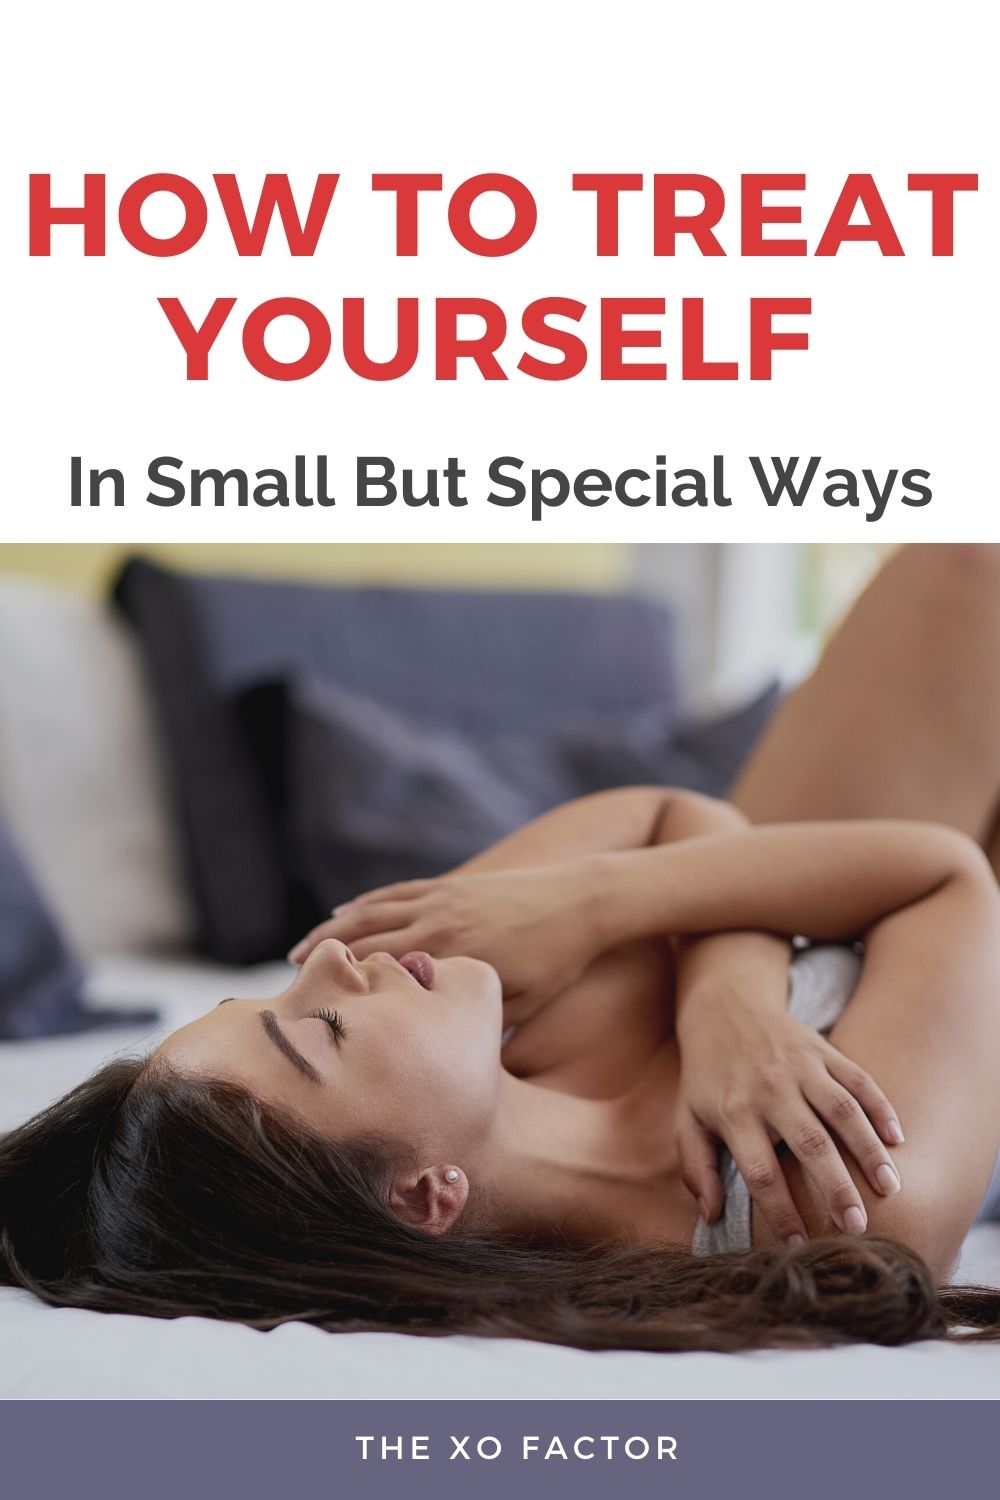 How to treat yourself in small but special ways